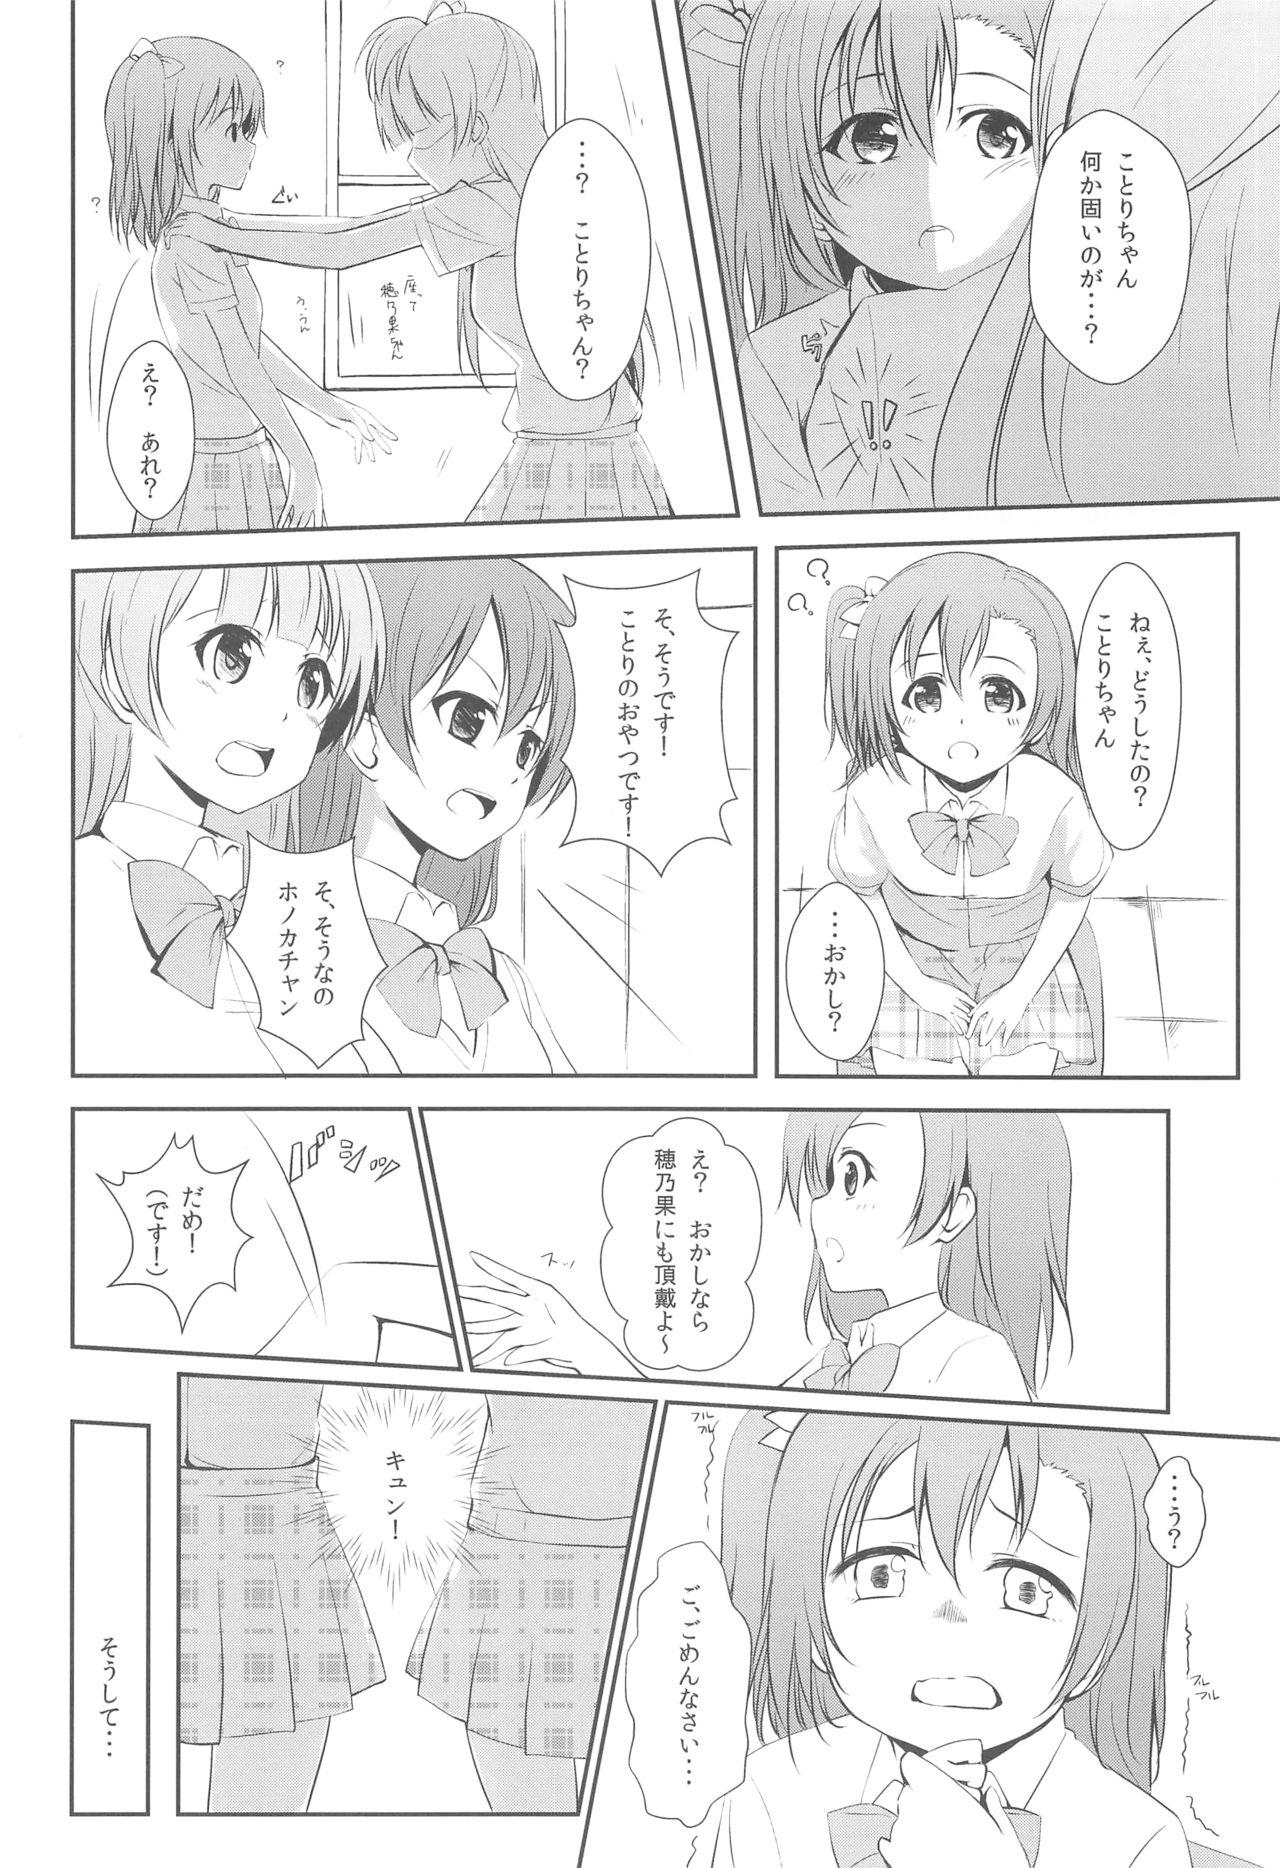 3some UNBALANCED LOVE. - Love live Outdoor - Page 7